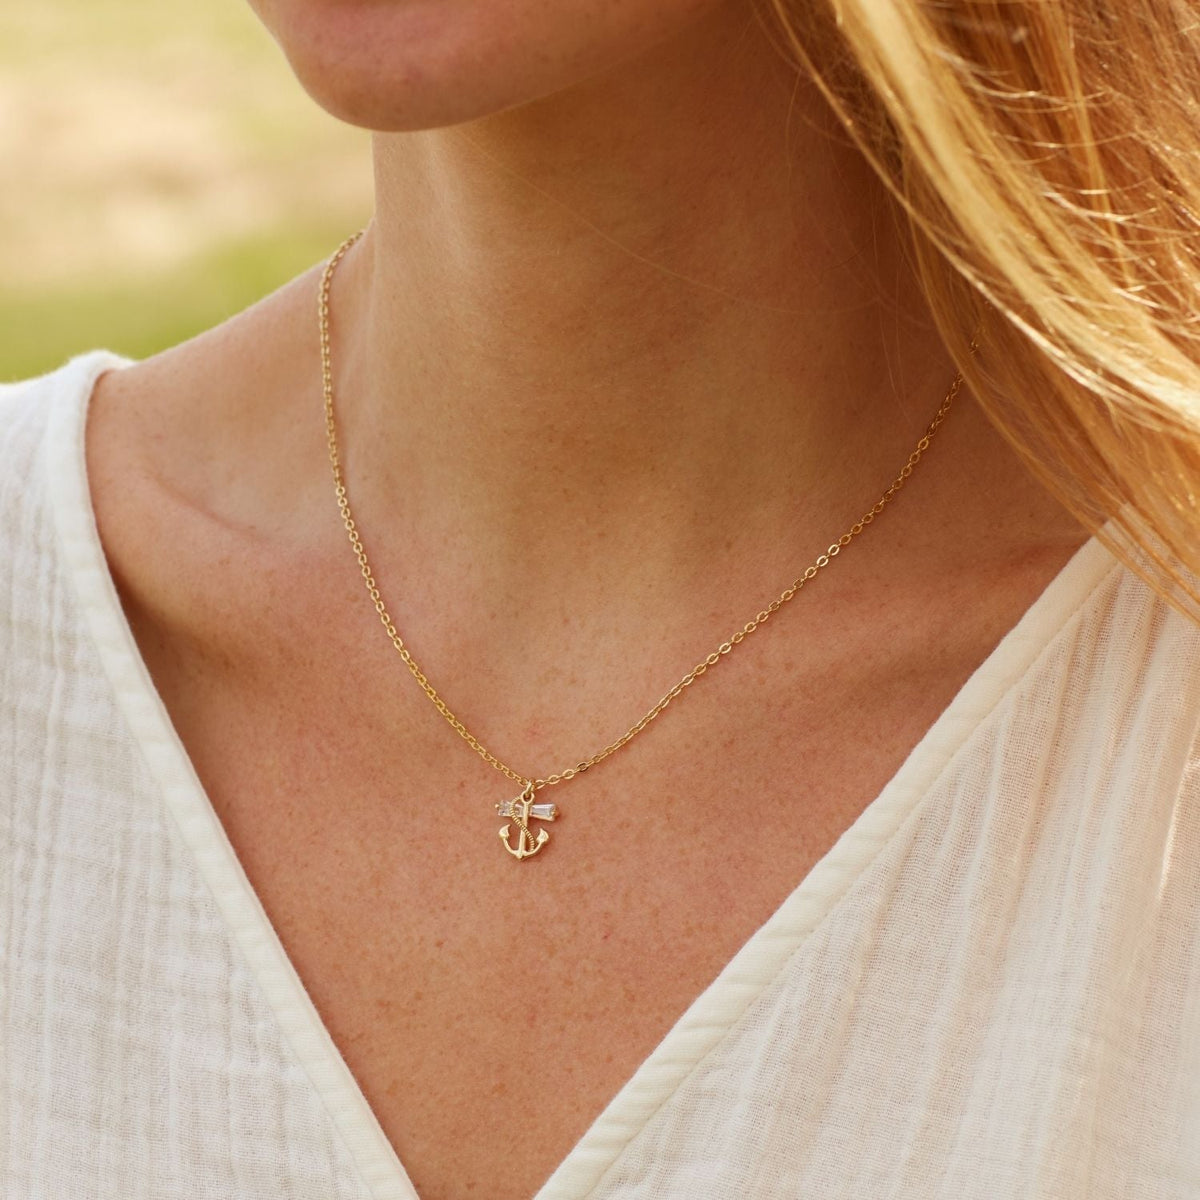 Mama to Be | One Baby Sweeter | Anchor Necklace